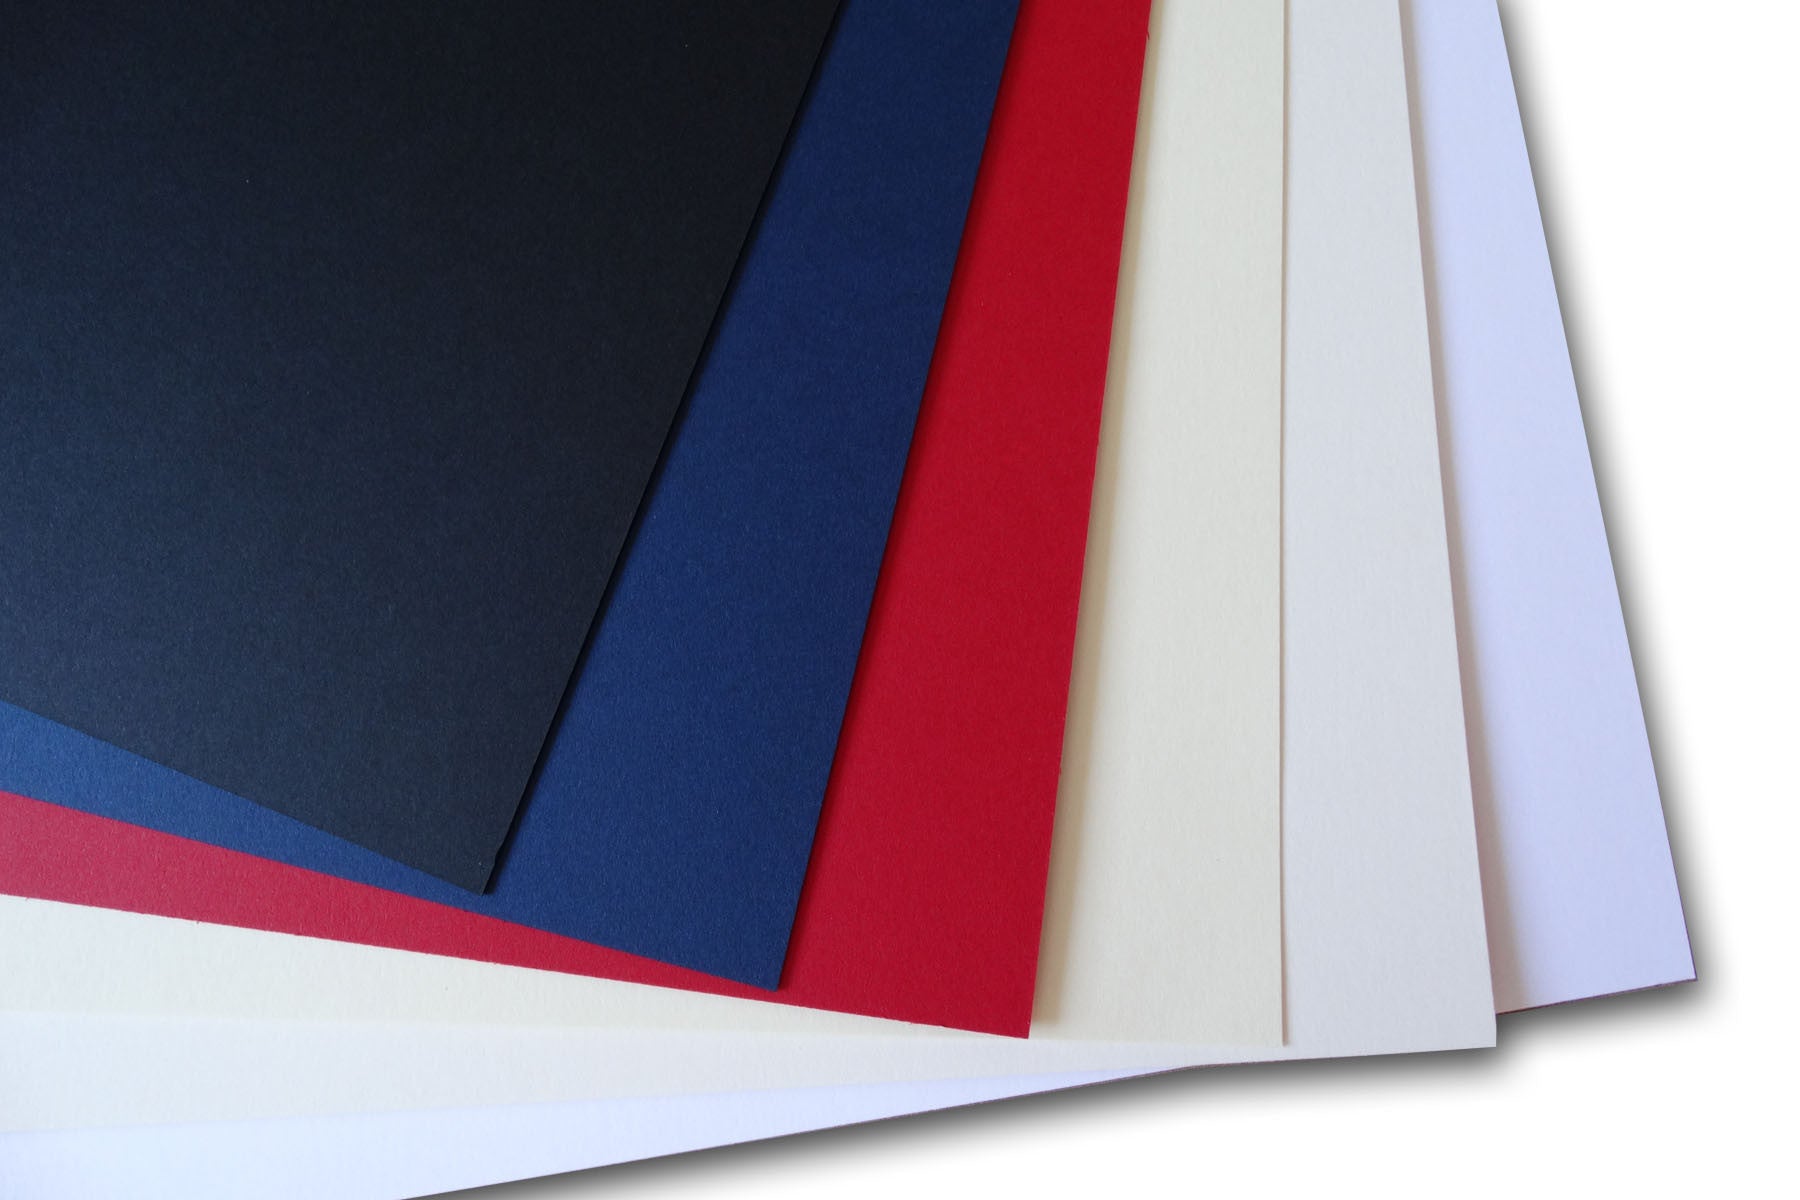 Classic CREST Smooth 130 lb Double Thick Discount Cardstock - CutCardStock